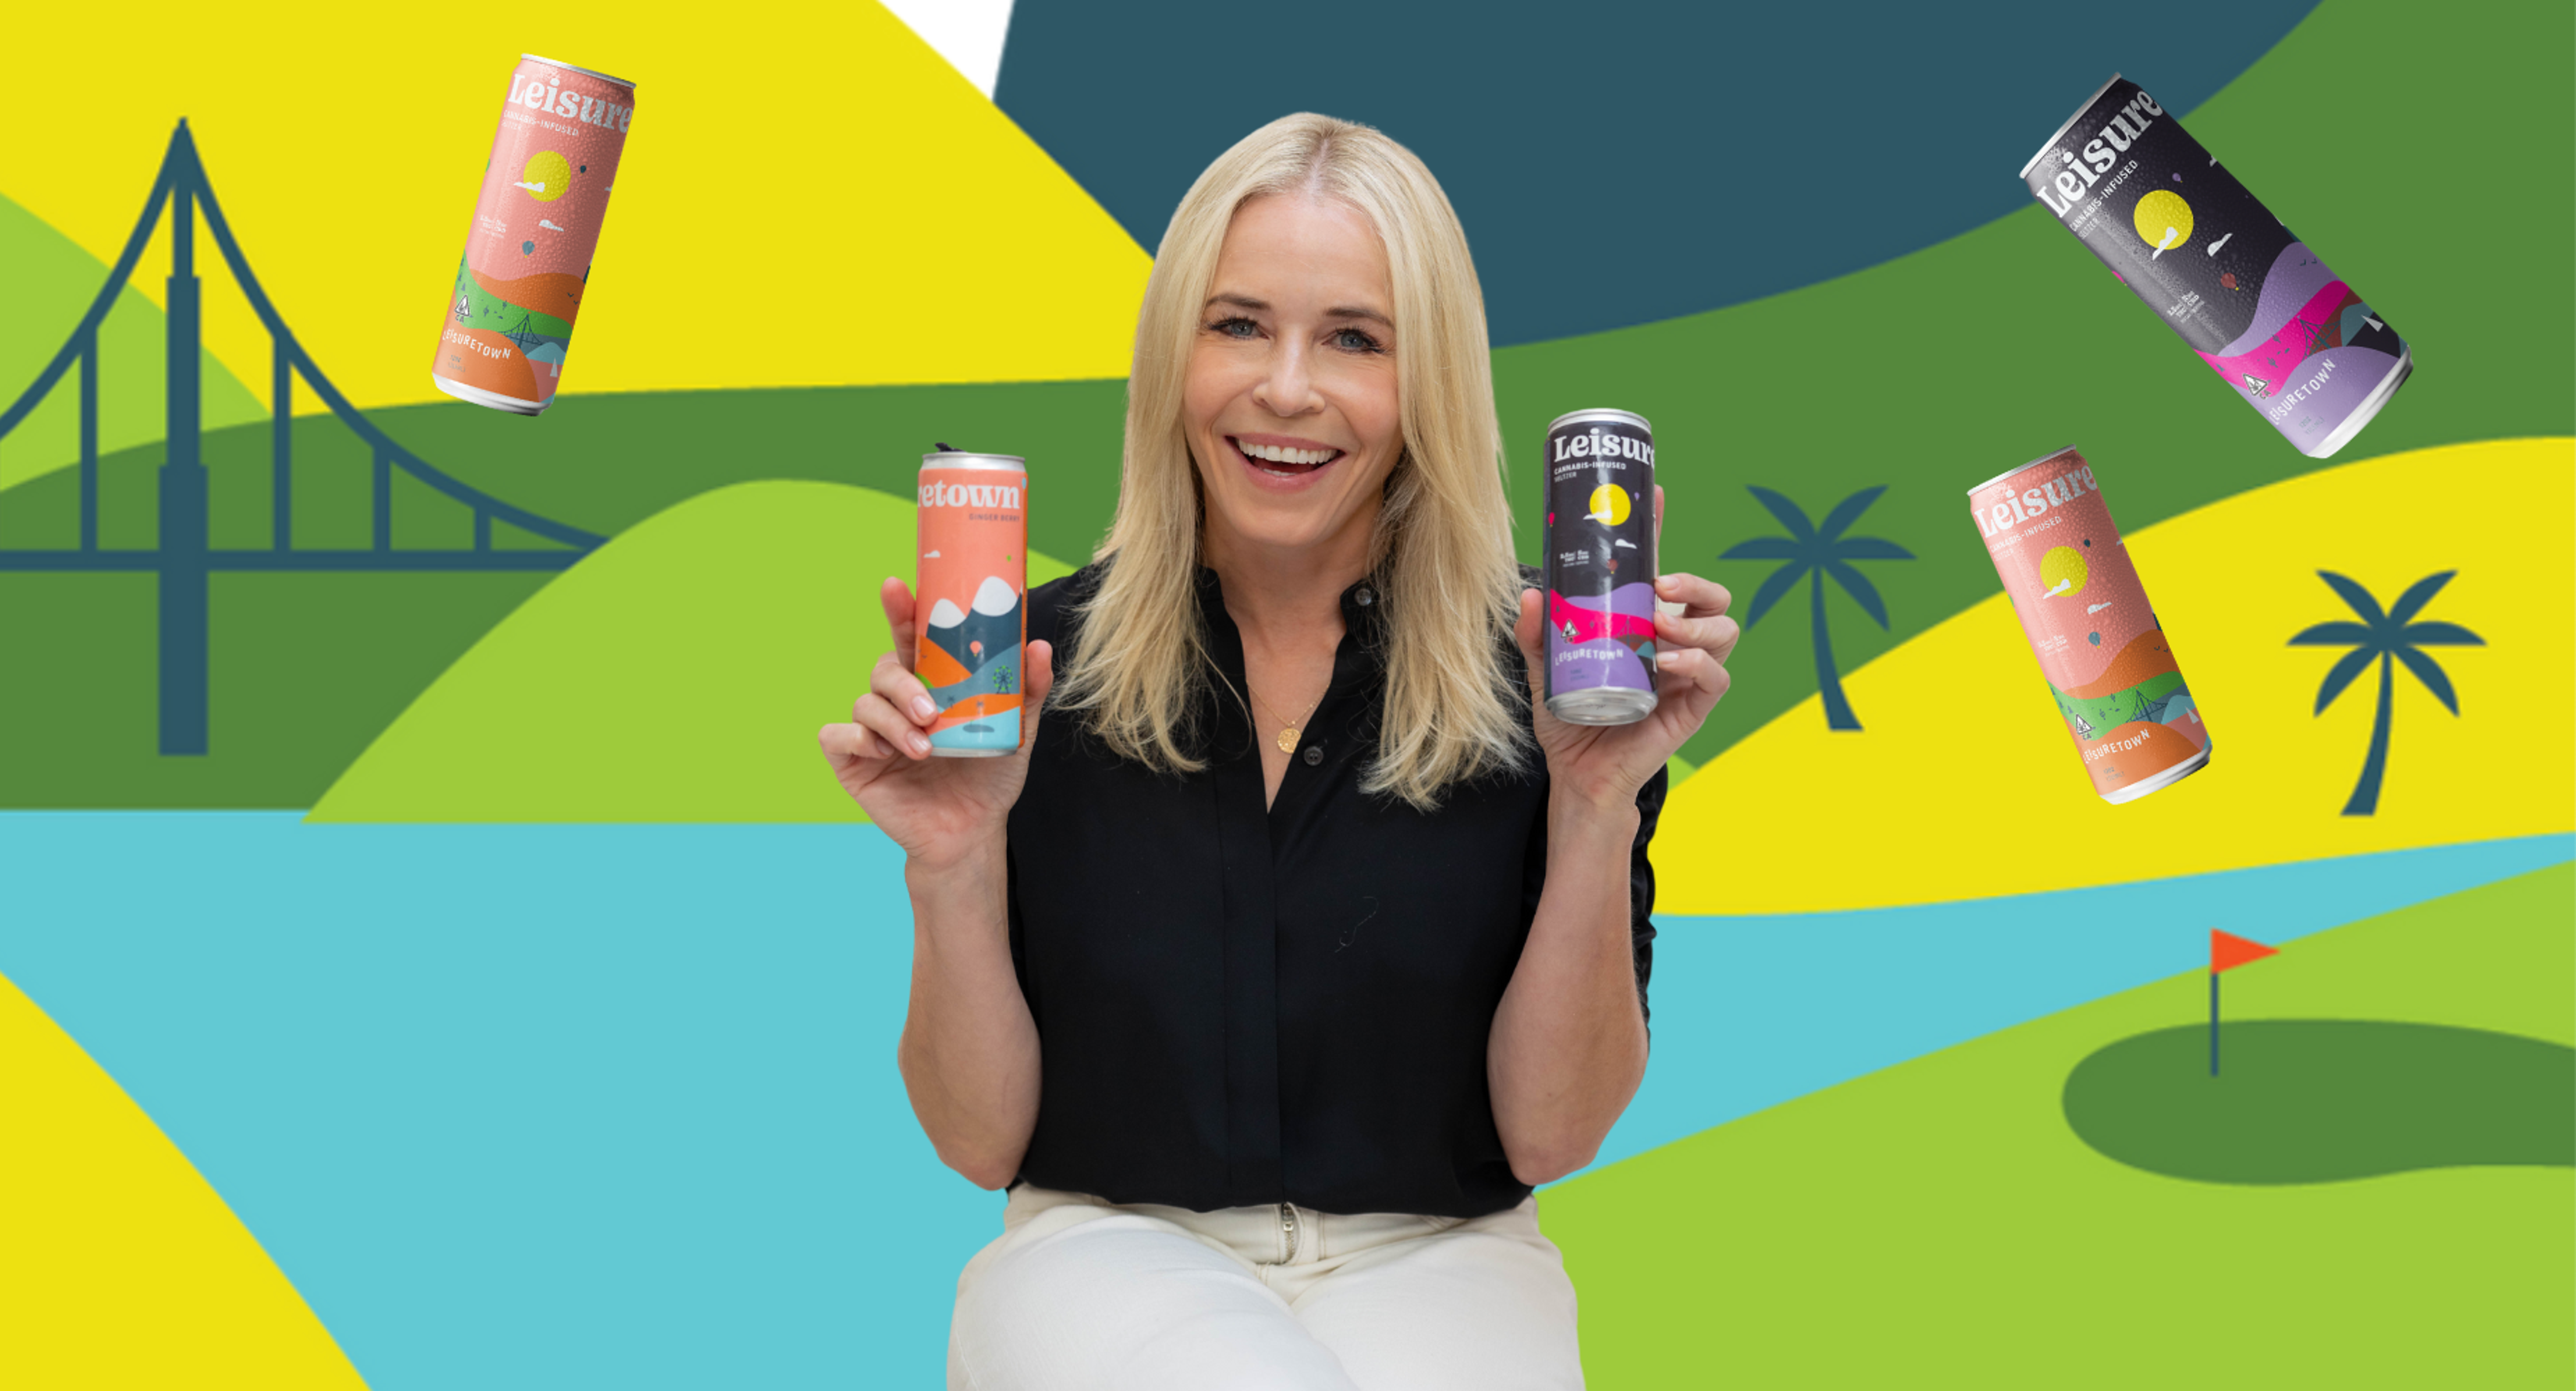 EXCLUSIVE: Chelsea Handler Wants To Cut Back On Alcohol, Partners With Diplo-Backed Cannabis Drink Maker Leisuretown